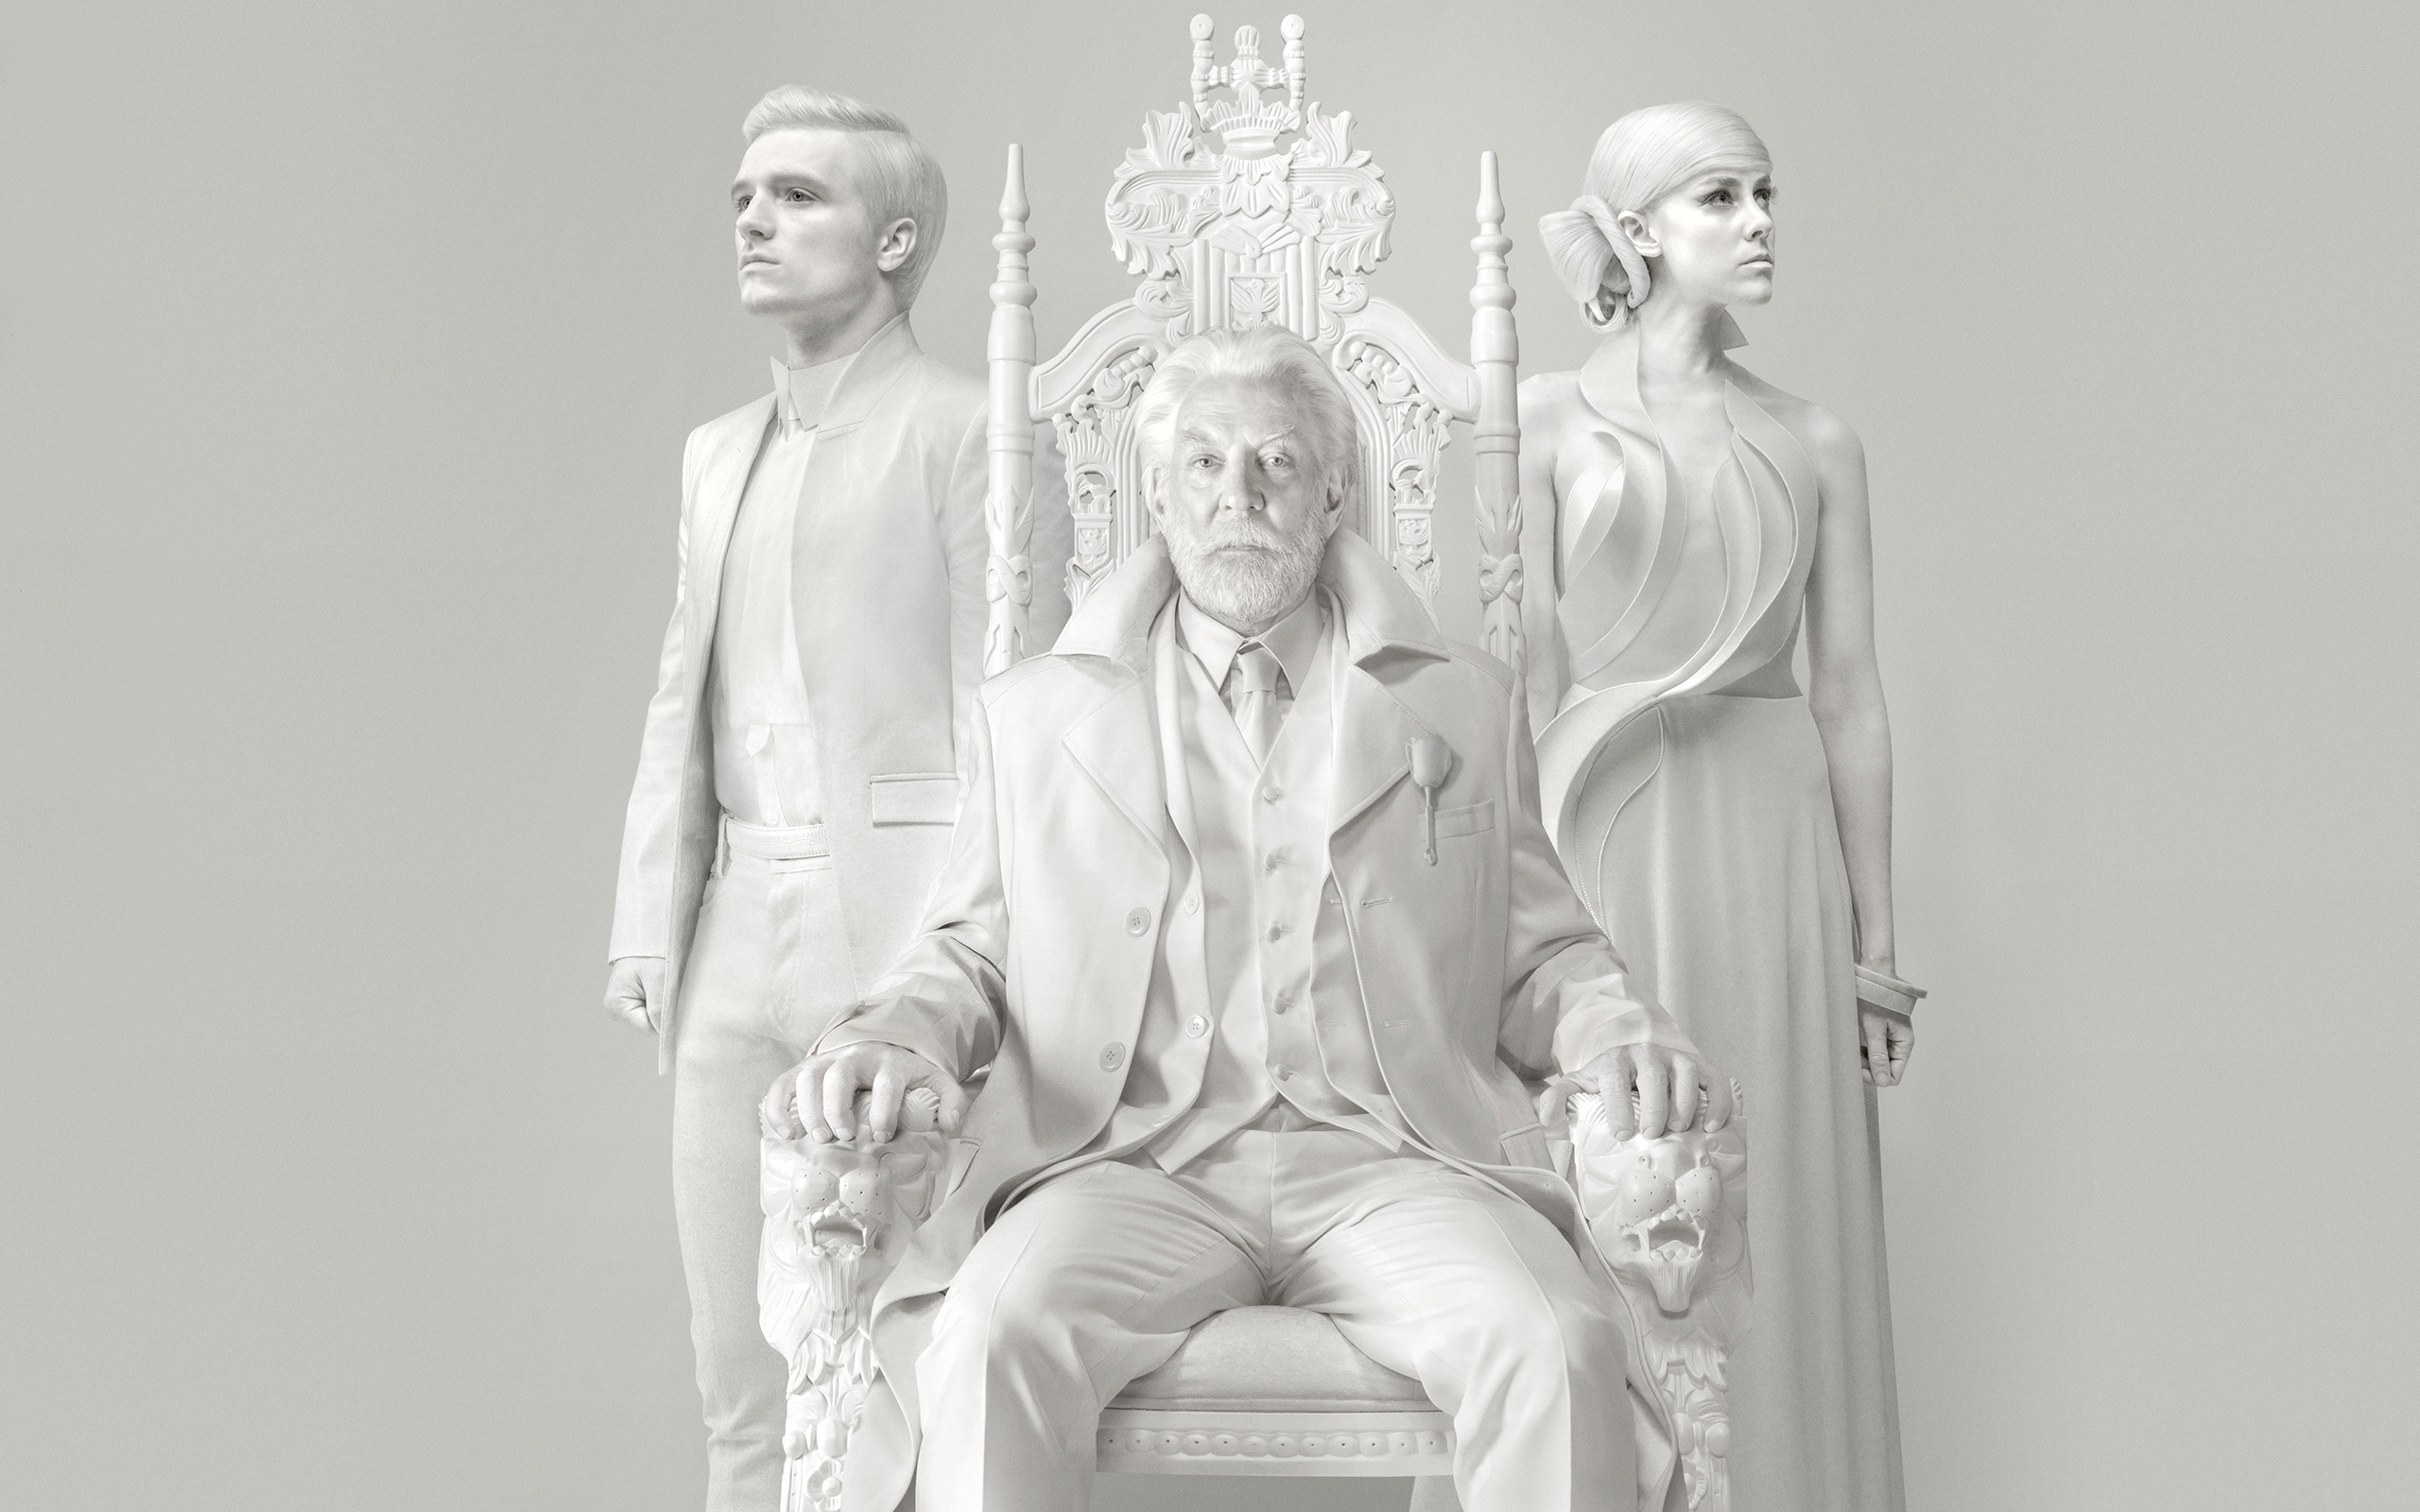 The Hunger Games: Mockingjay - Part 1 Wallpapers